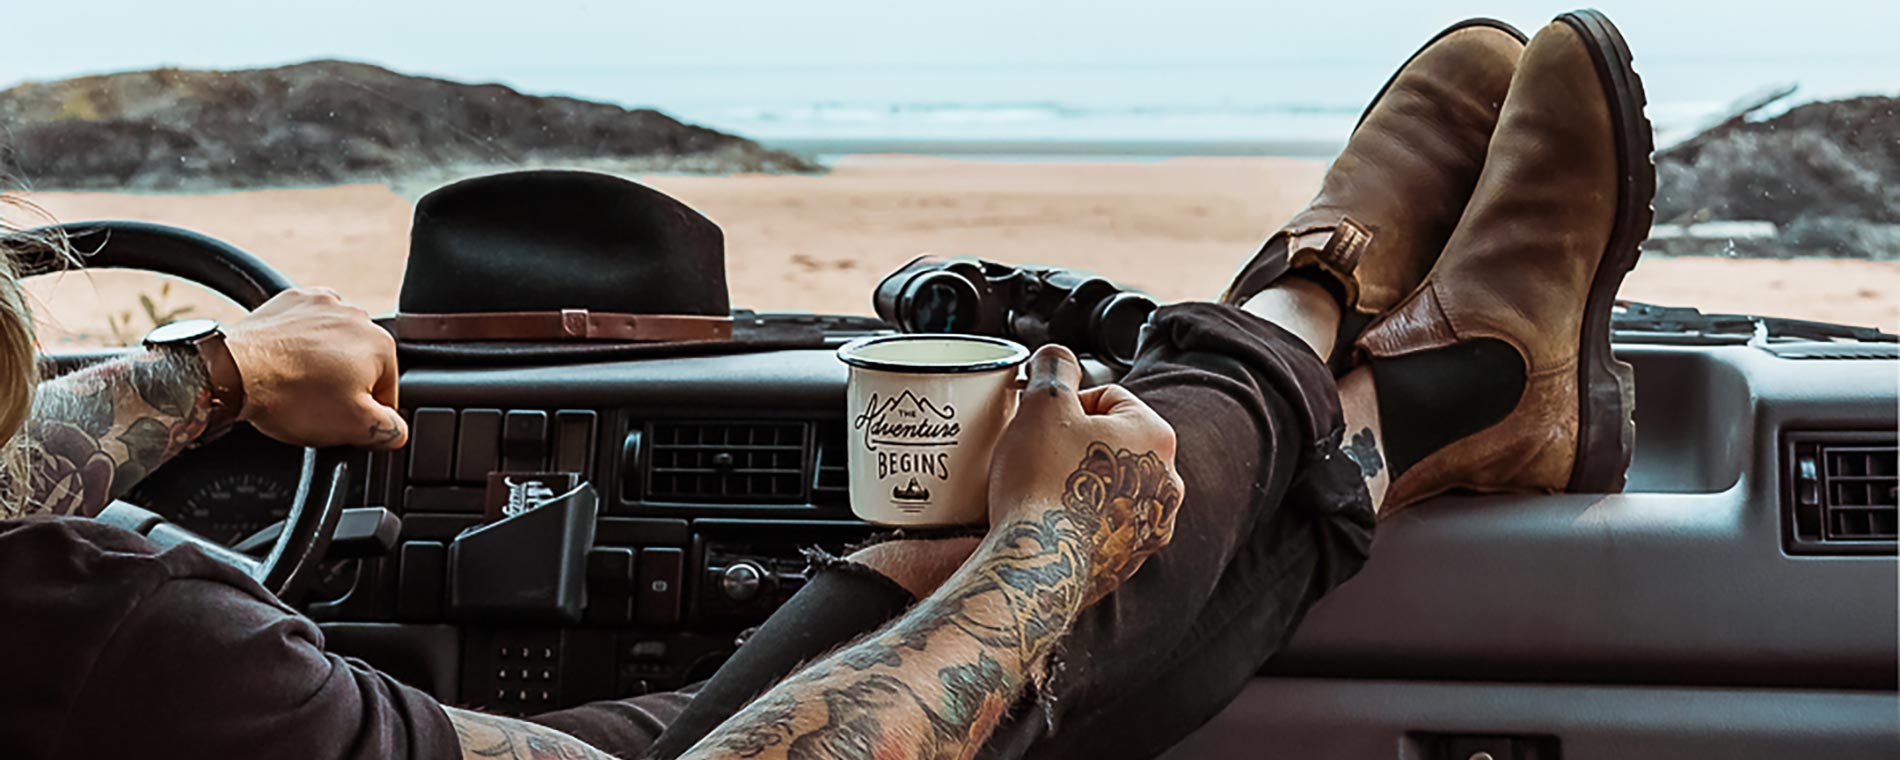 Jay R. Mcdonald sits in the driver's seat of a car with his feet up on the dash and a mug of coffee in his hand. in the distance there is a beach leading to the ocean.